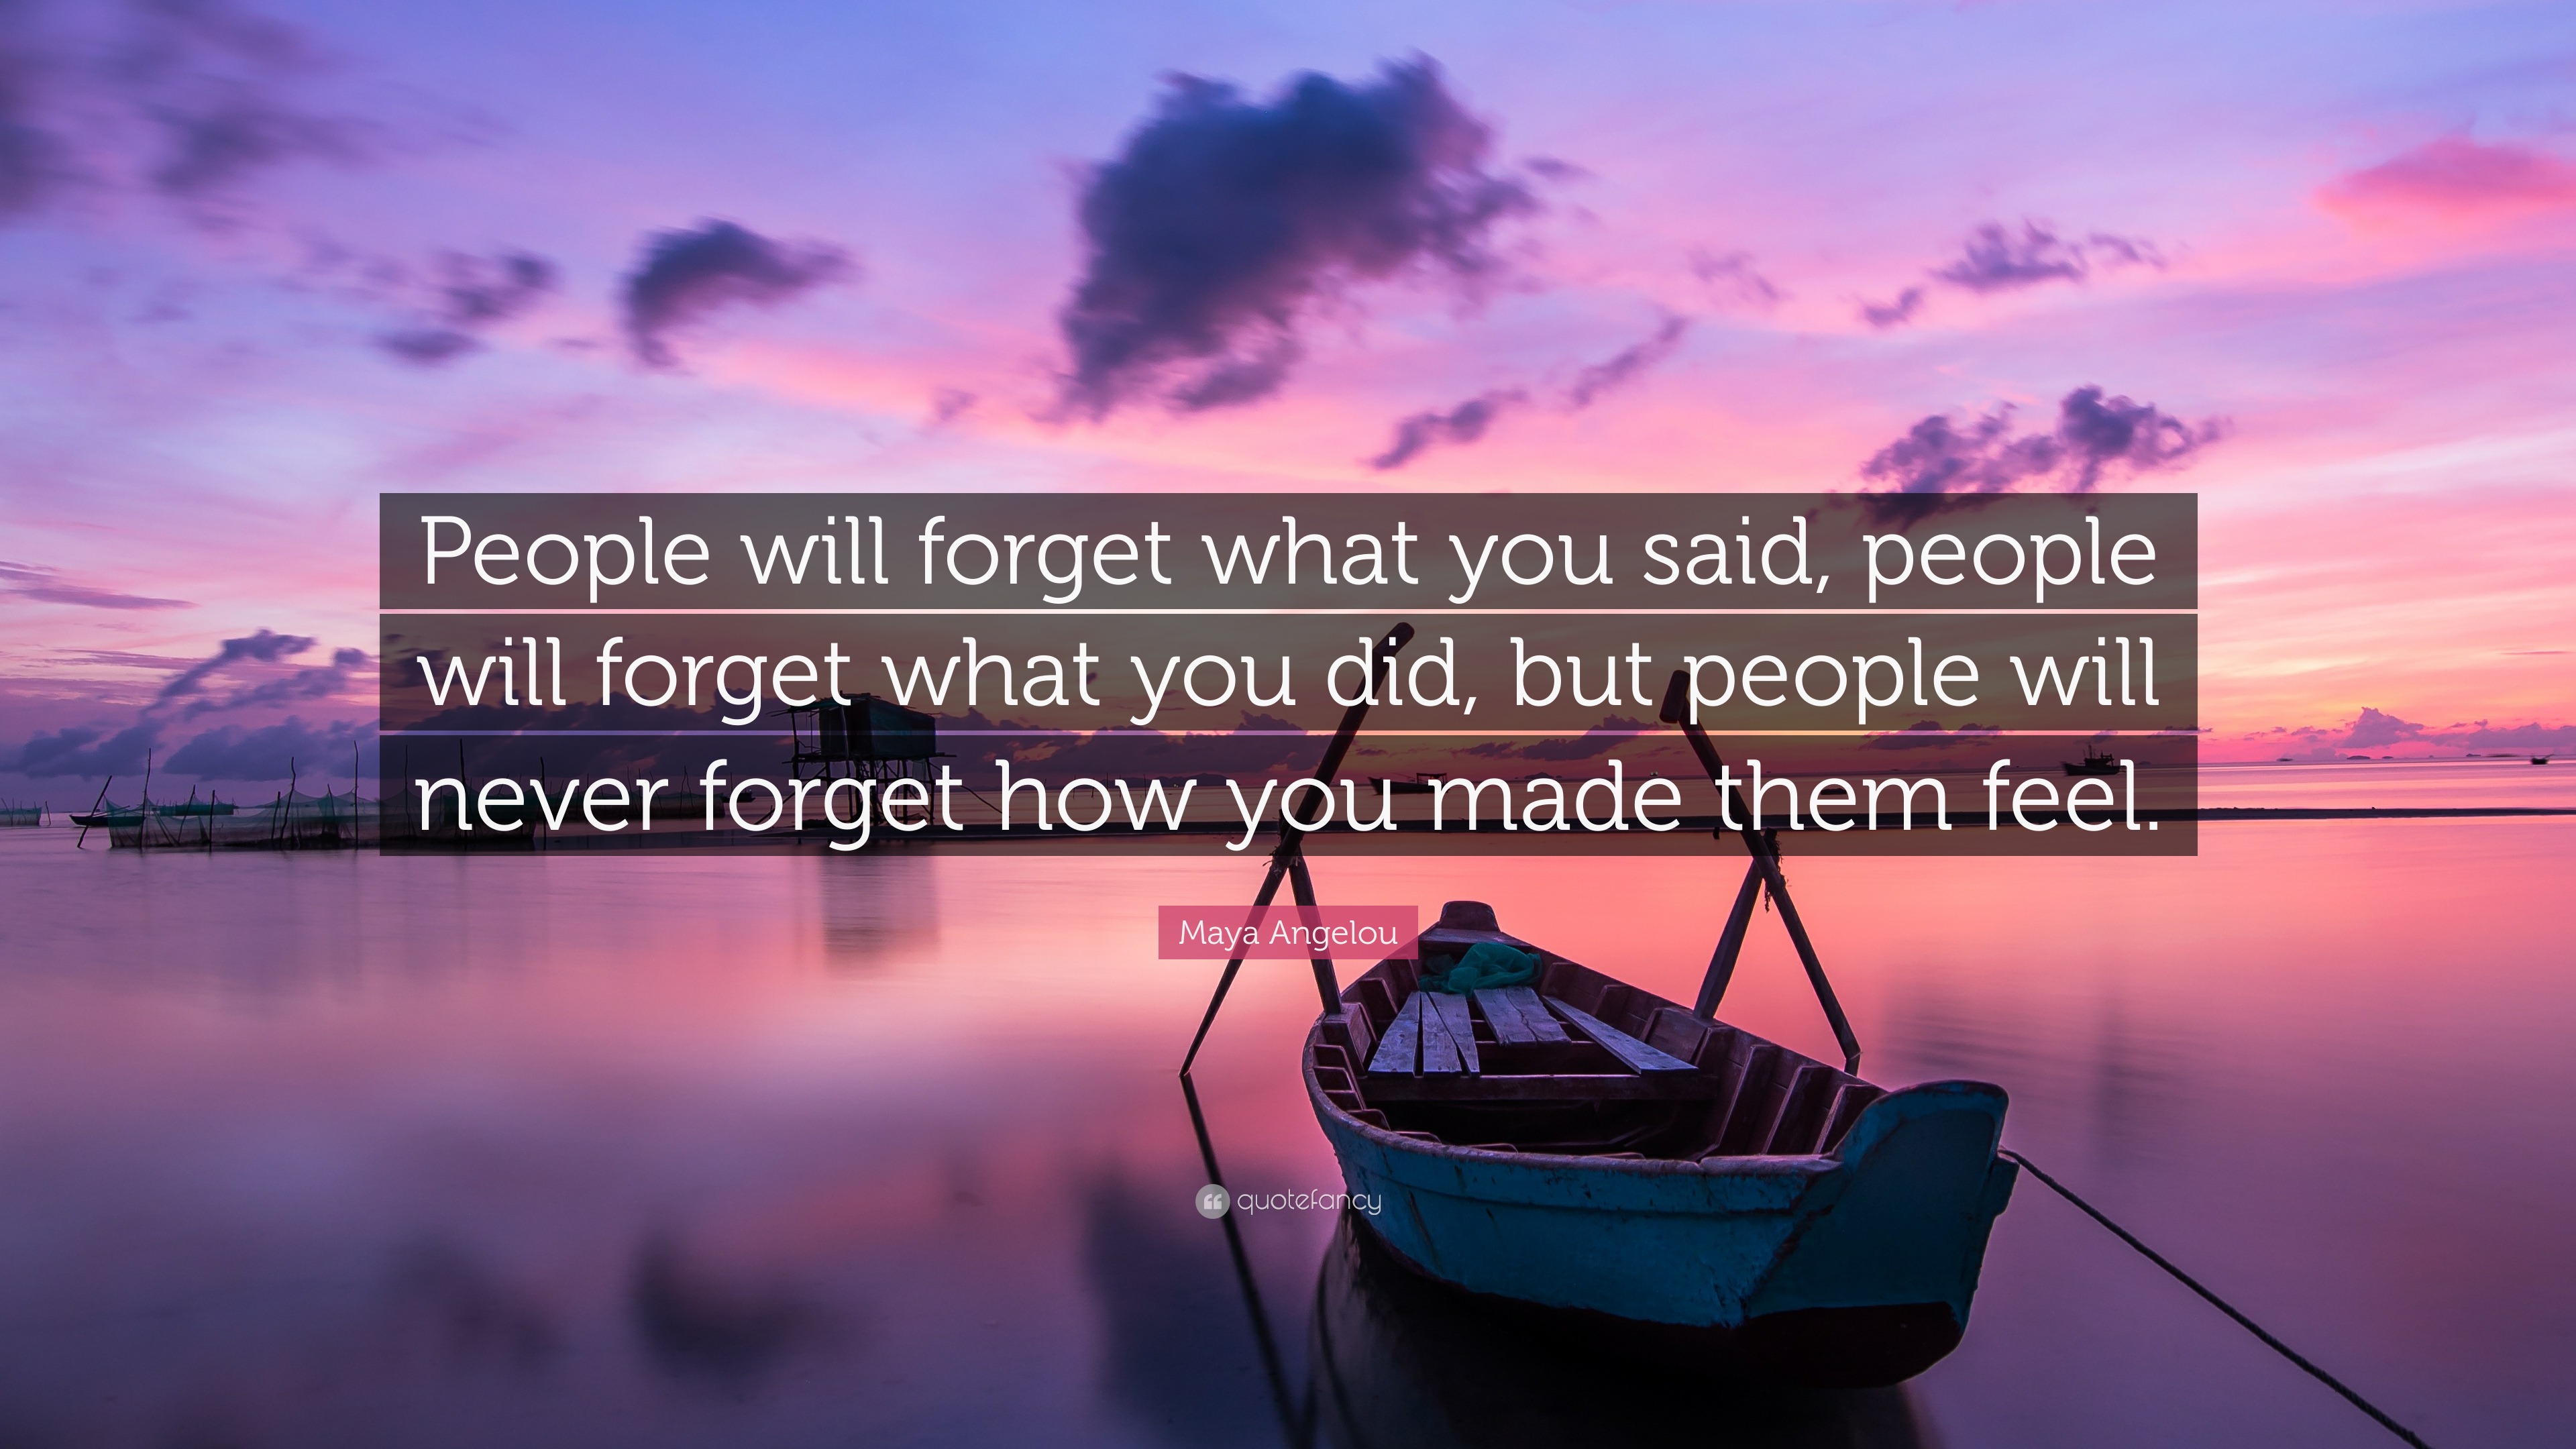 Maya Angelou Quote: "People will forget what you said ...